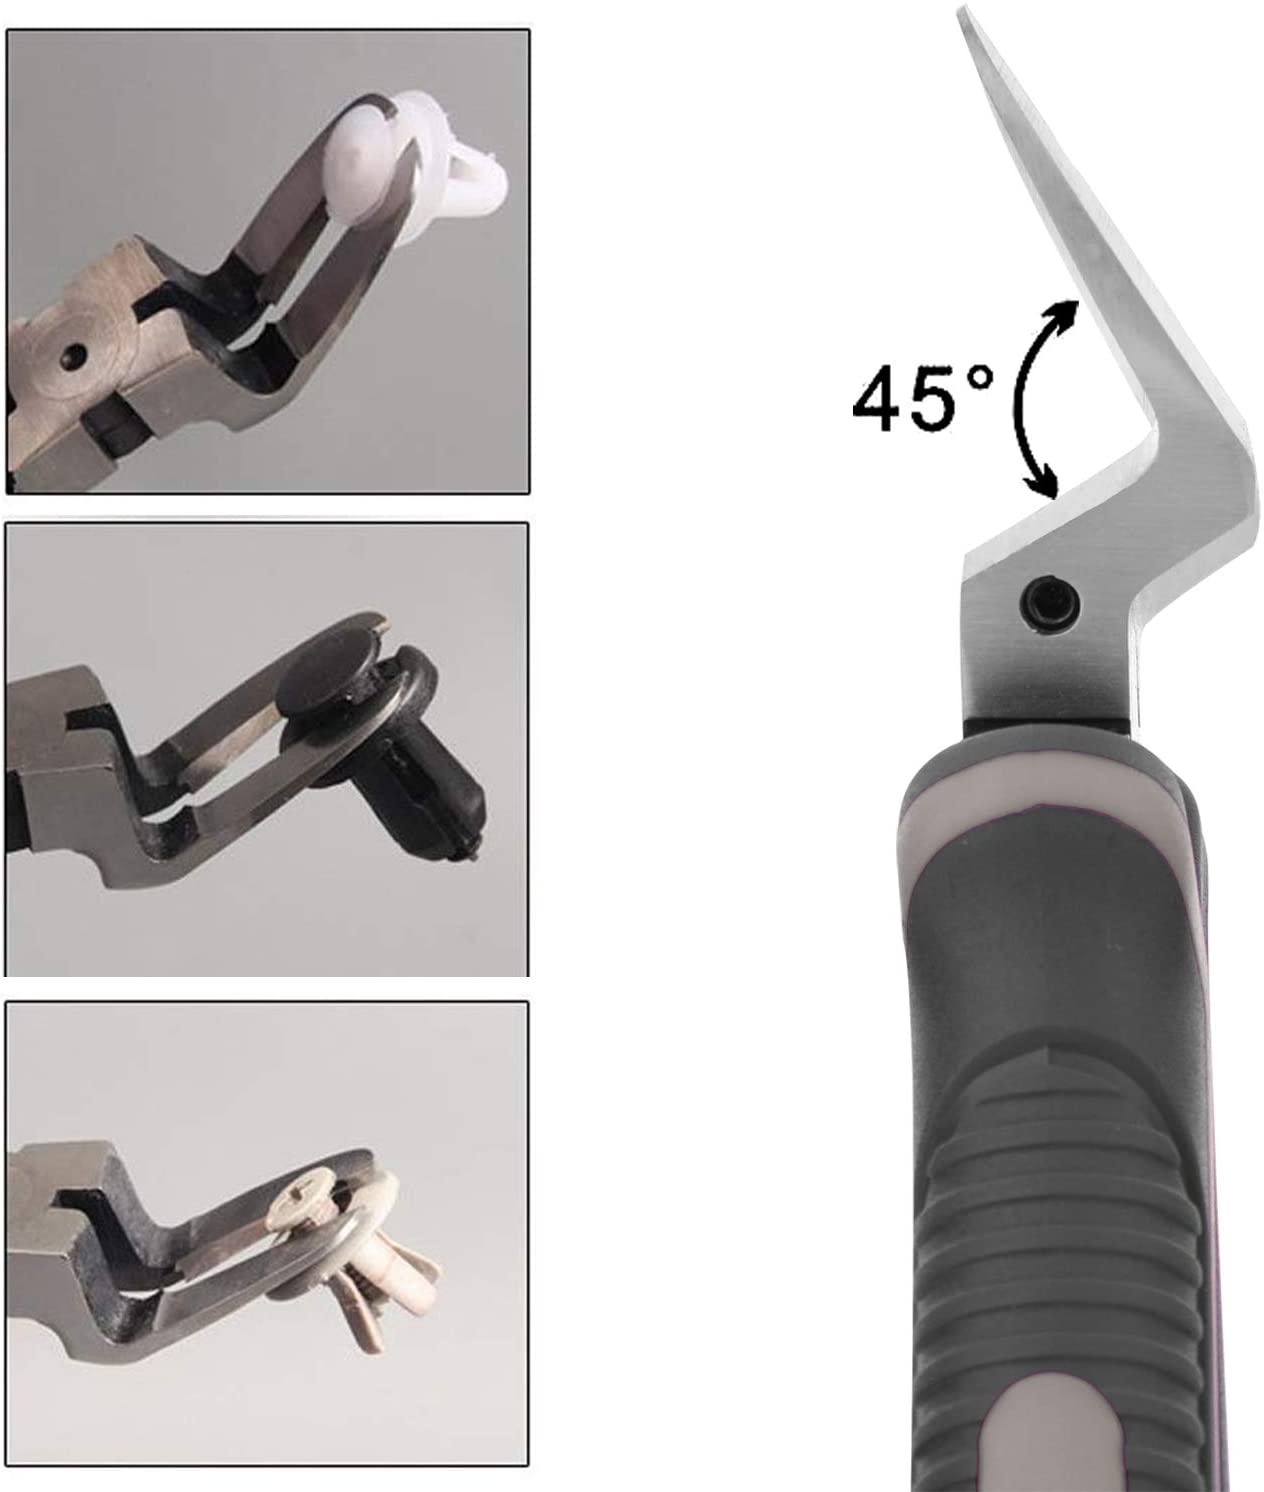 Push Pin, Clip, Retainer, or Fastener Removal Pliers [krx12] - $16.99 ...